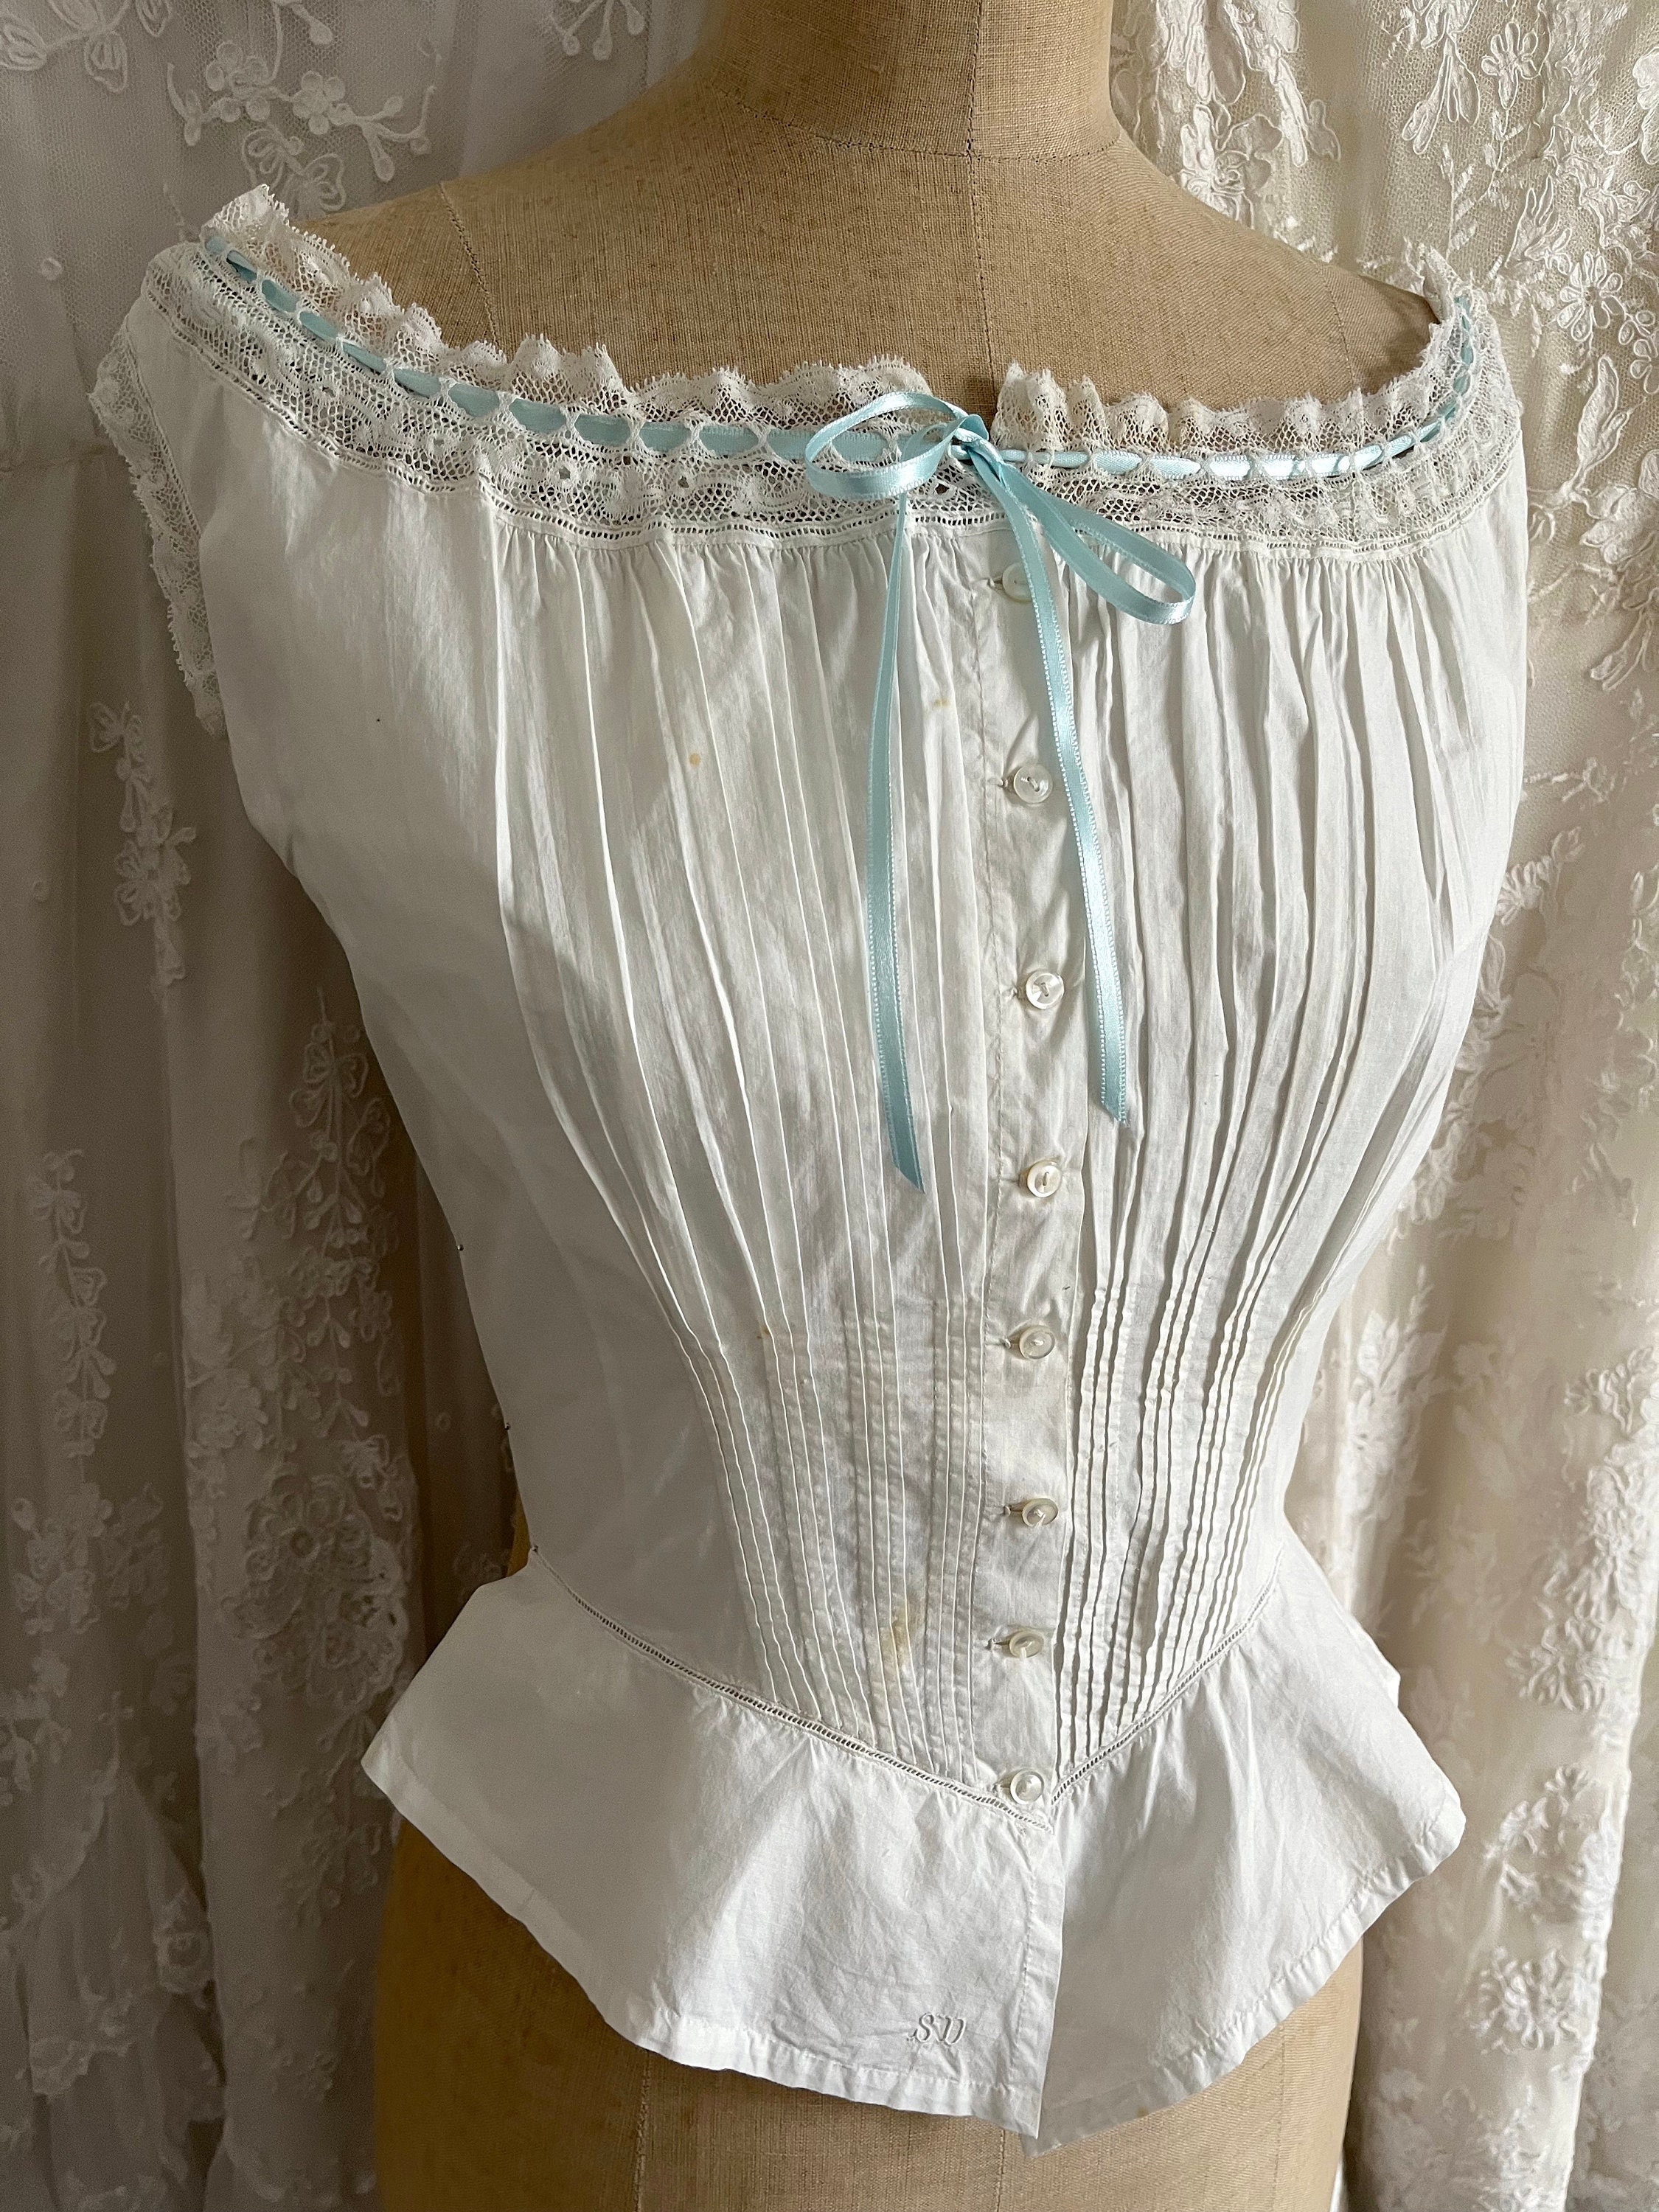 Antique Lace Trimmed Corset Cover Blue Ribbon -  Norway